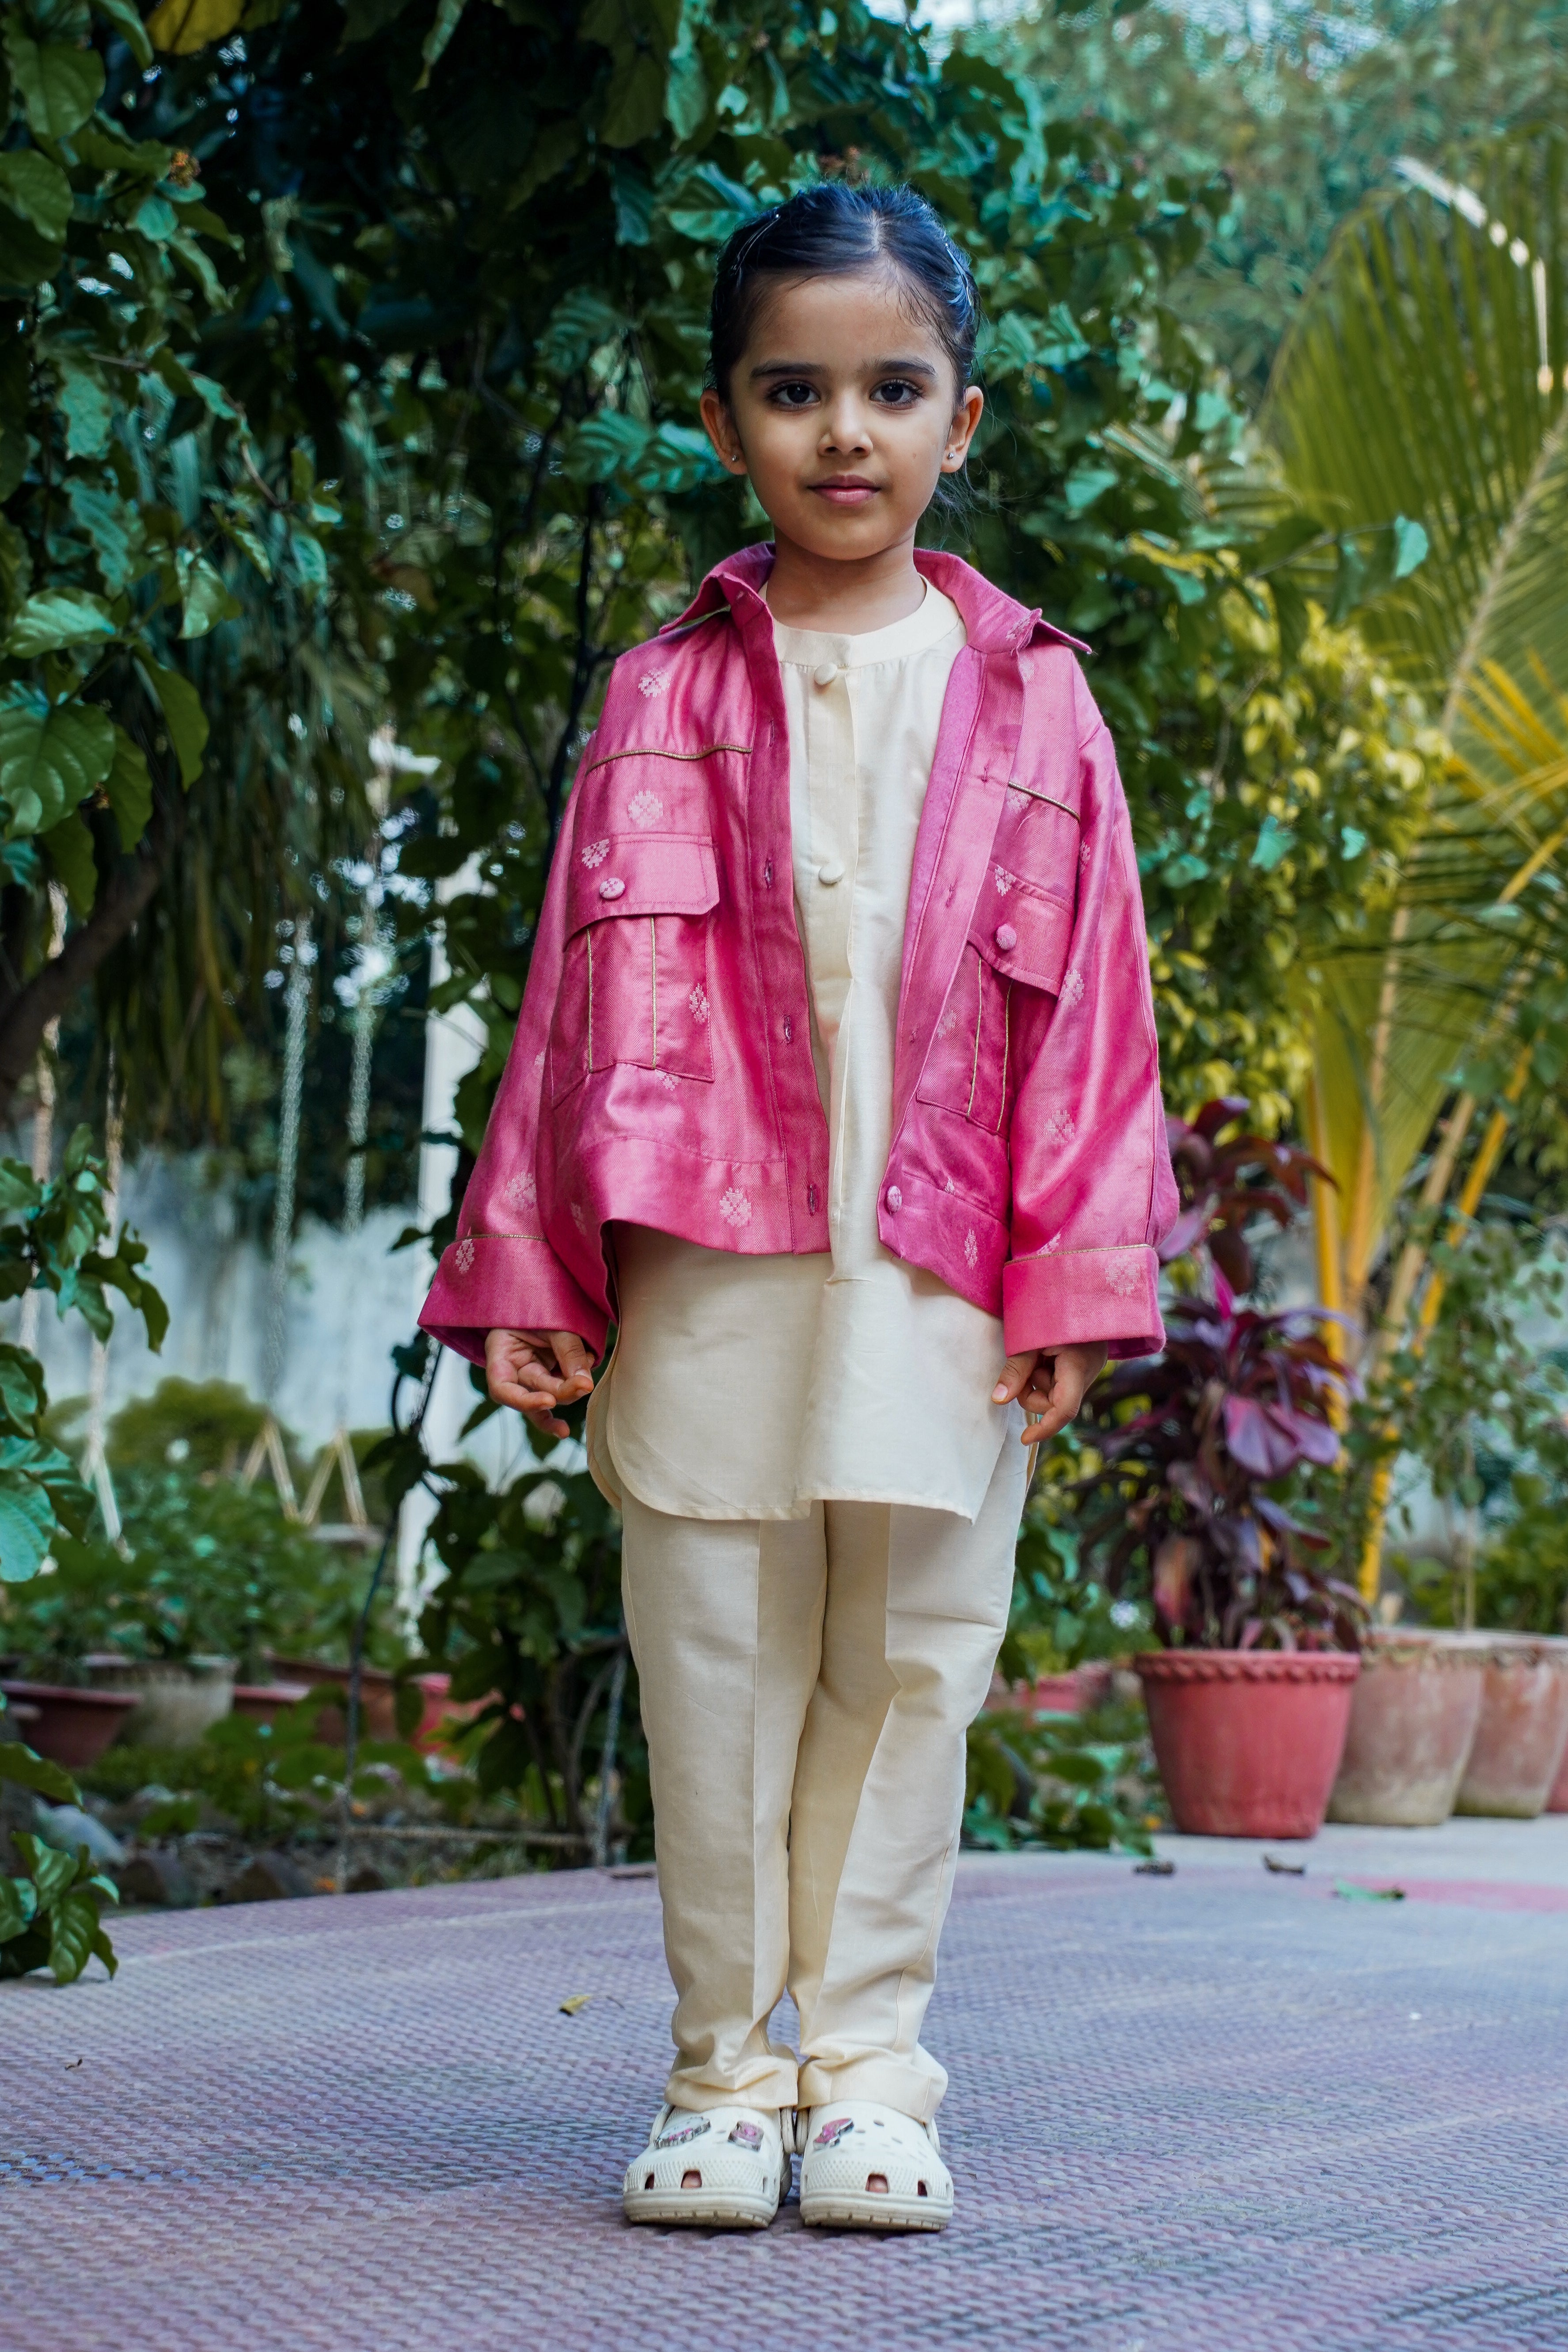 Bollywood-inspired kids' kurta pajama with jacket, perfect for ethnic events and weddings, showcasing traditional elegance and style.